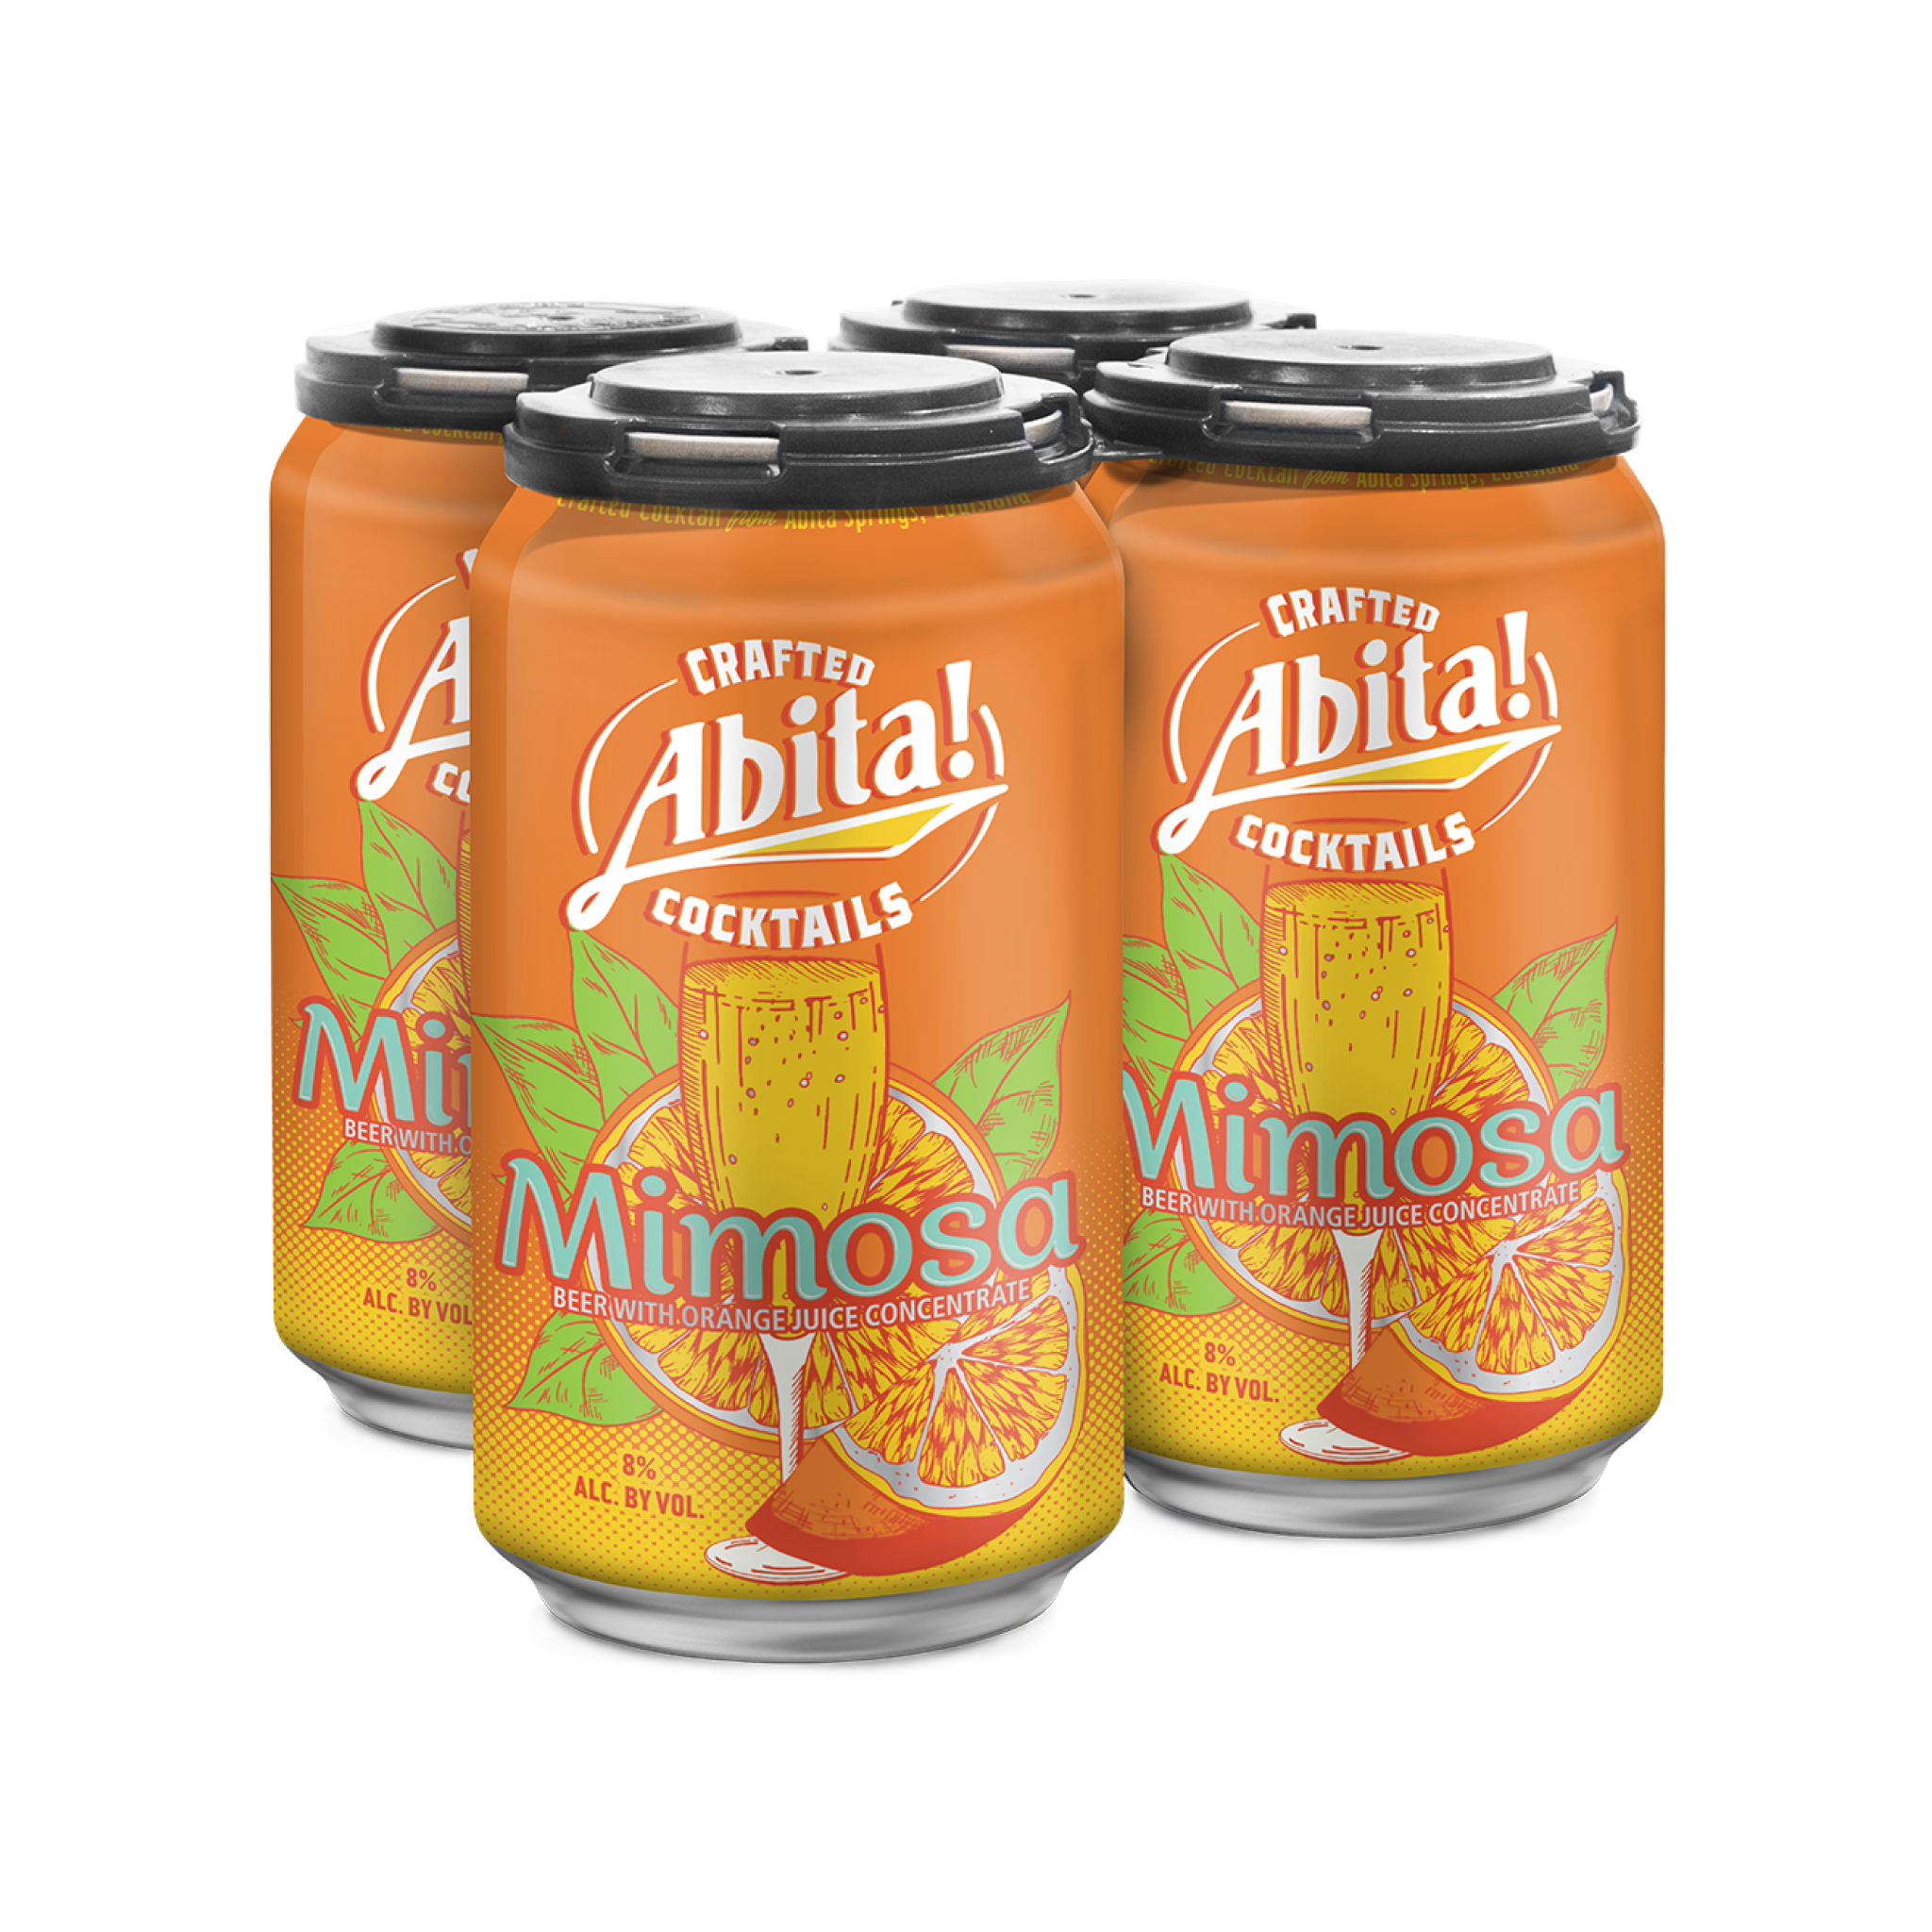 4 pack of Abita Crafted Cocktails, Mimosa